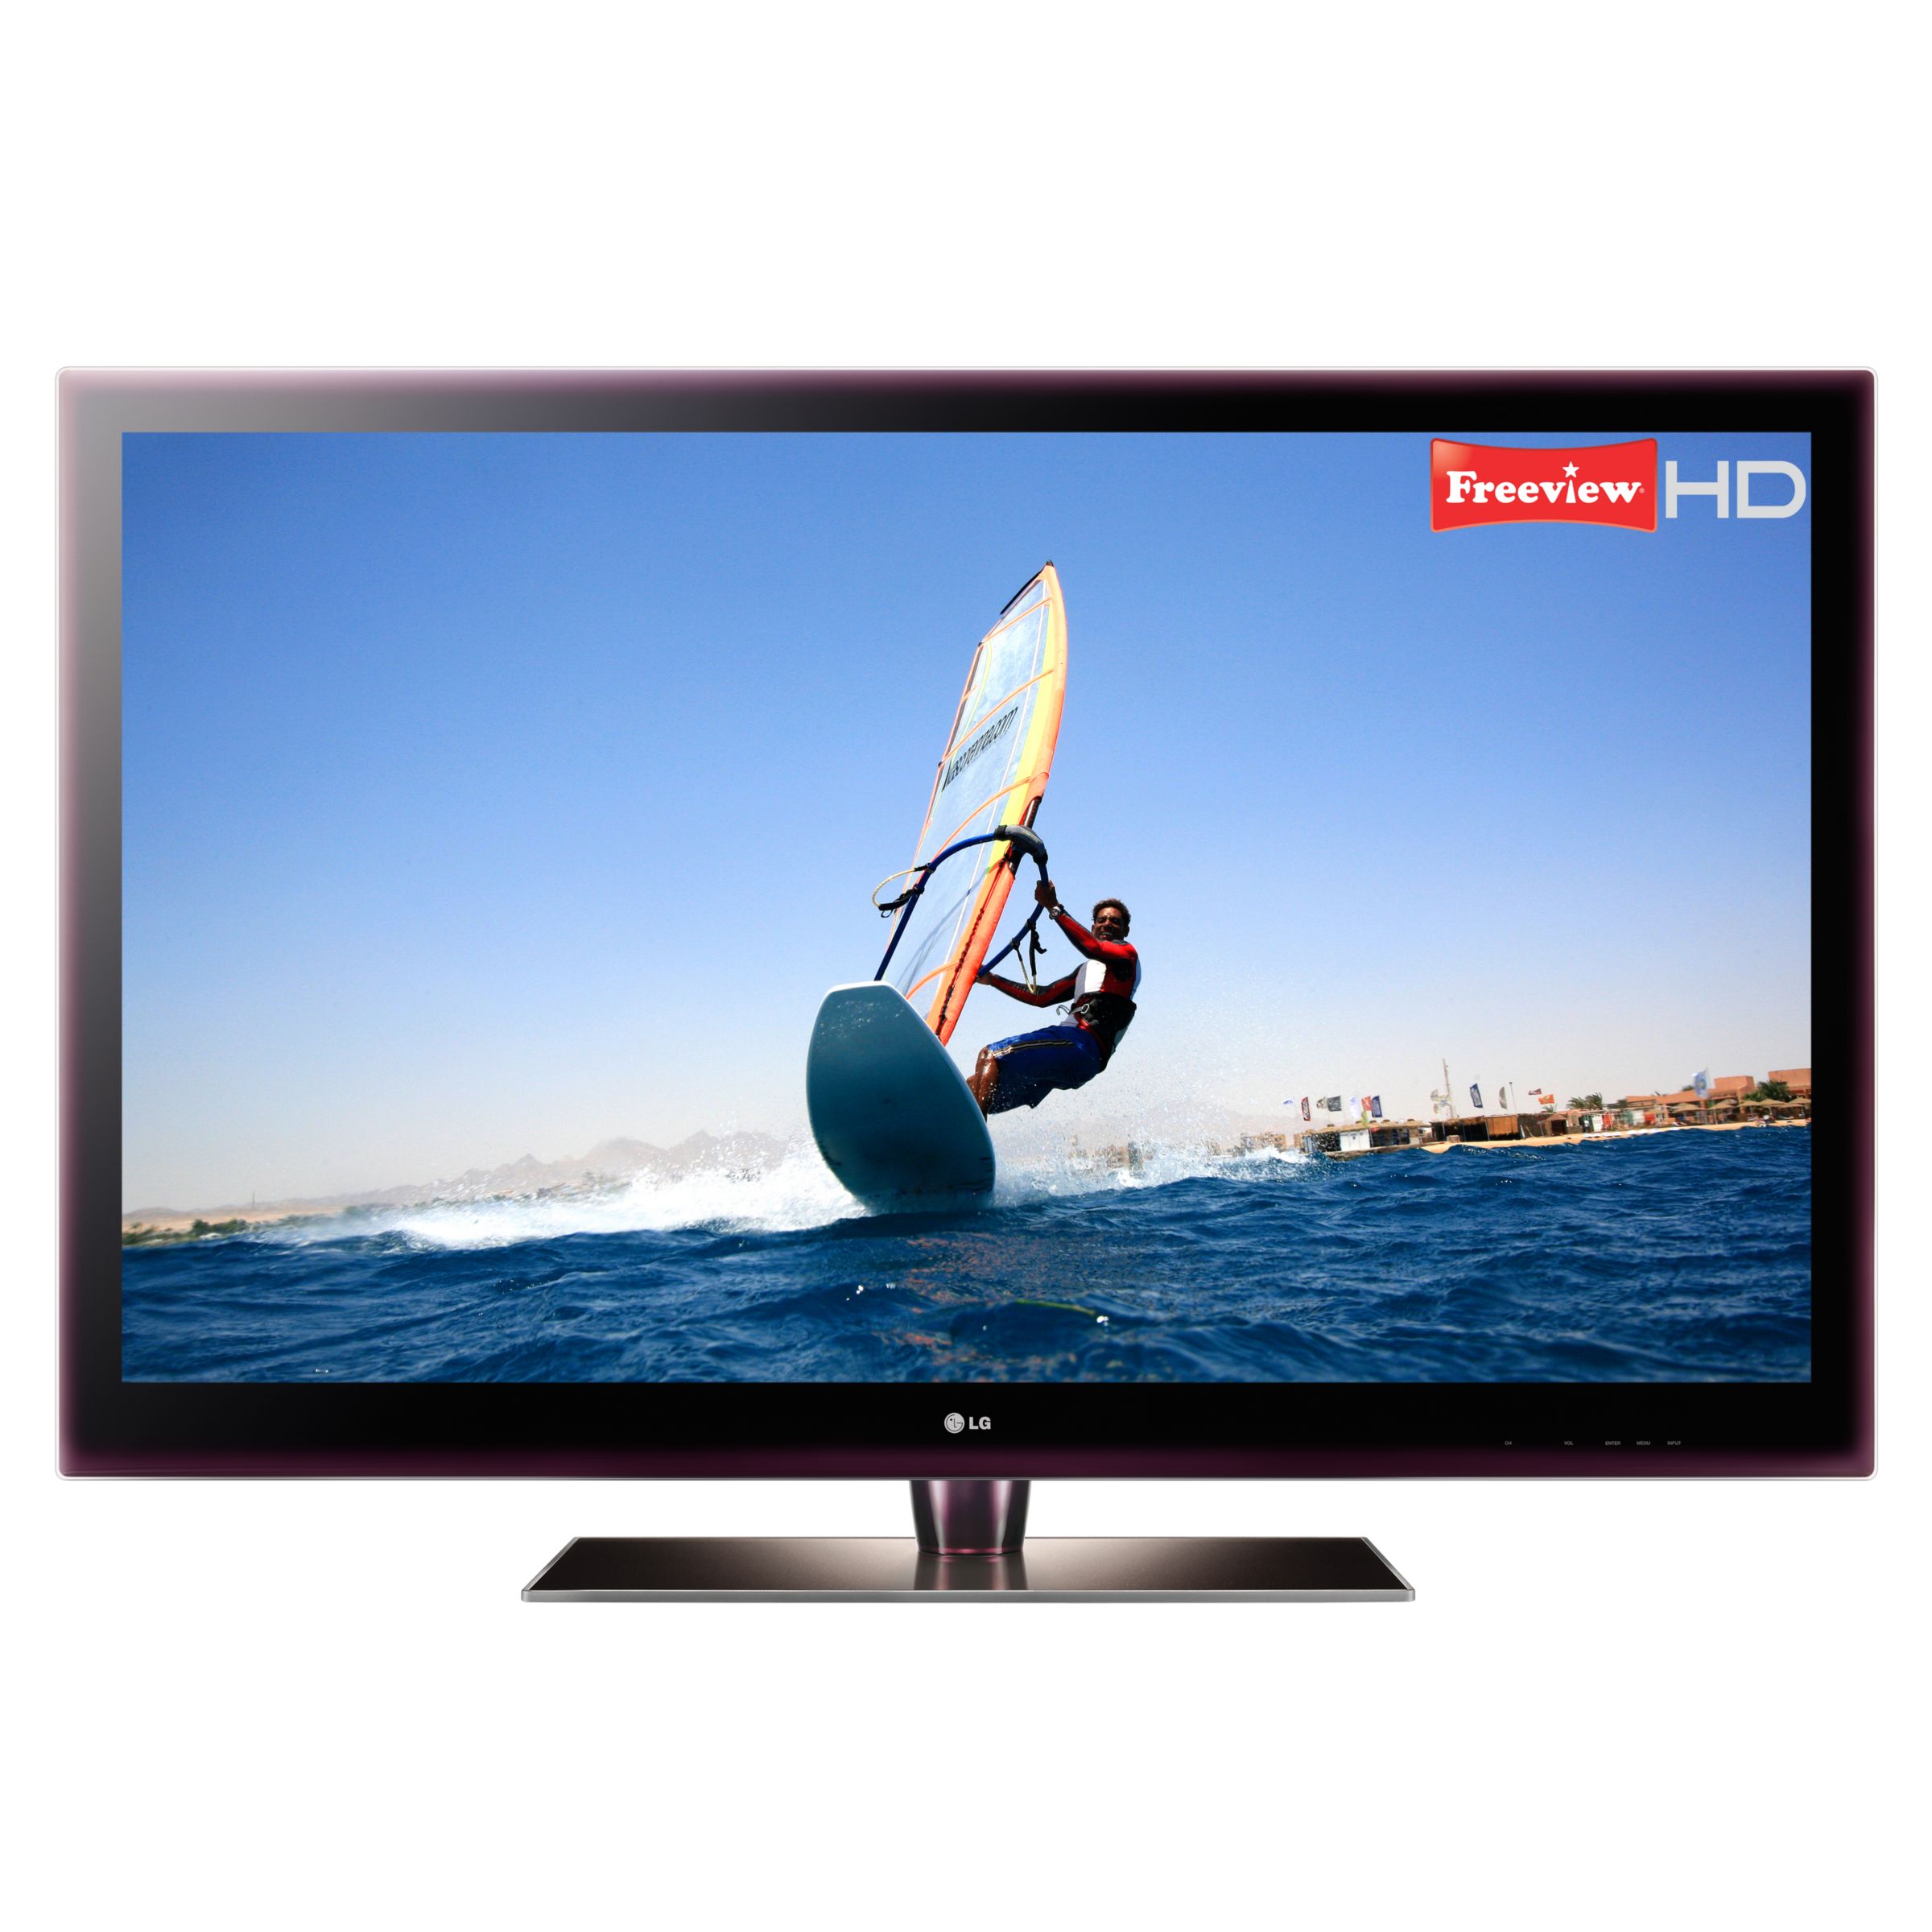 LG Infinia 42LE7900 LED HD 1080p Television, 42 Inch with Built-in Freeview HD at John Lewis